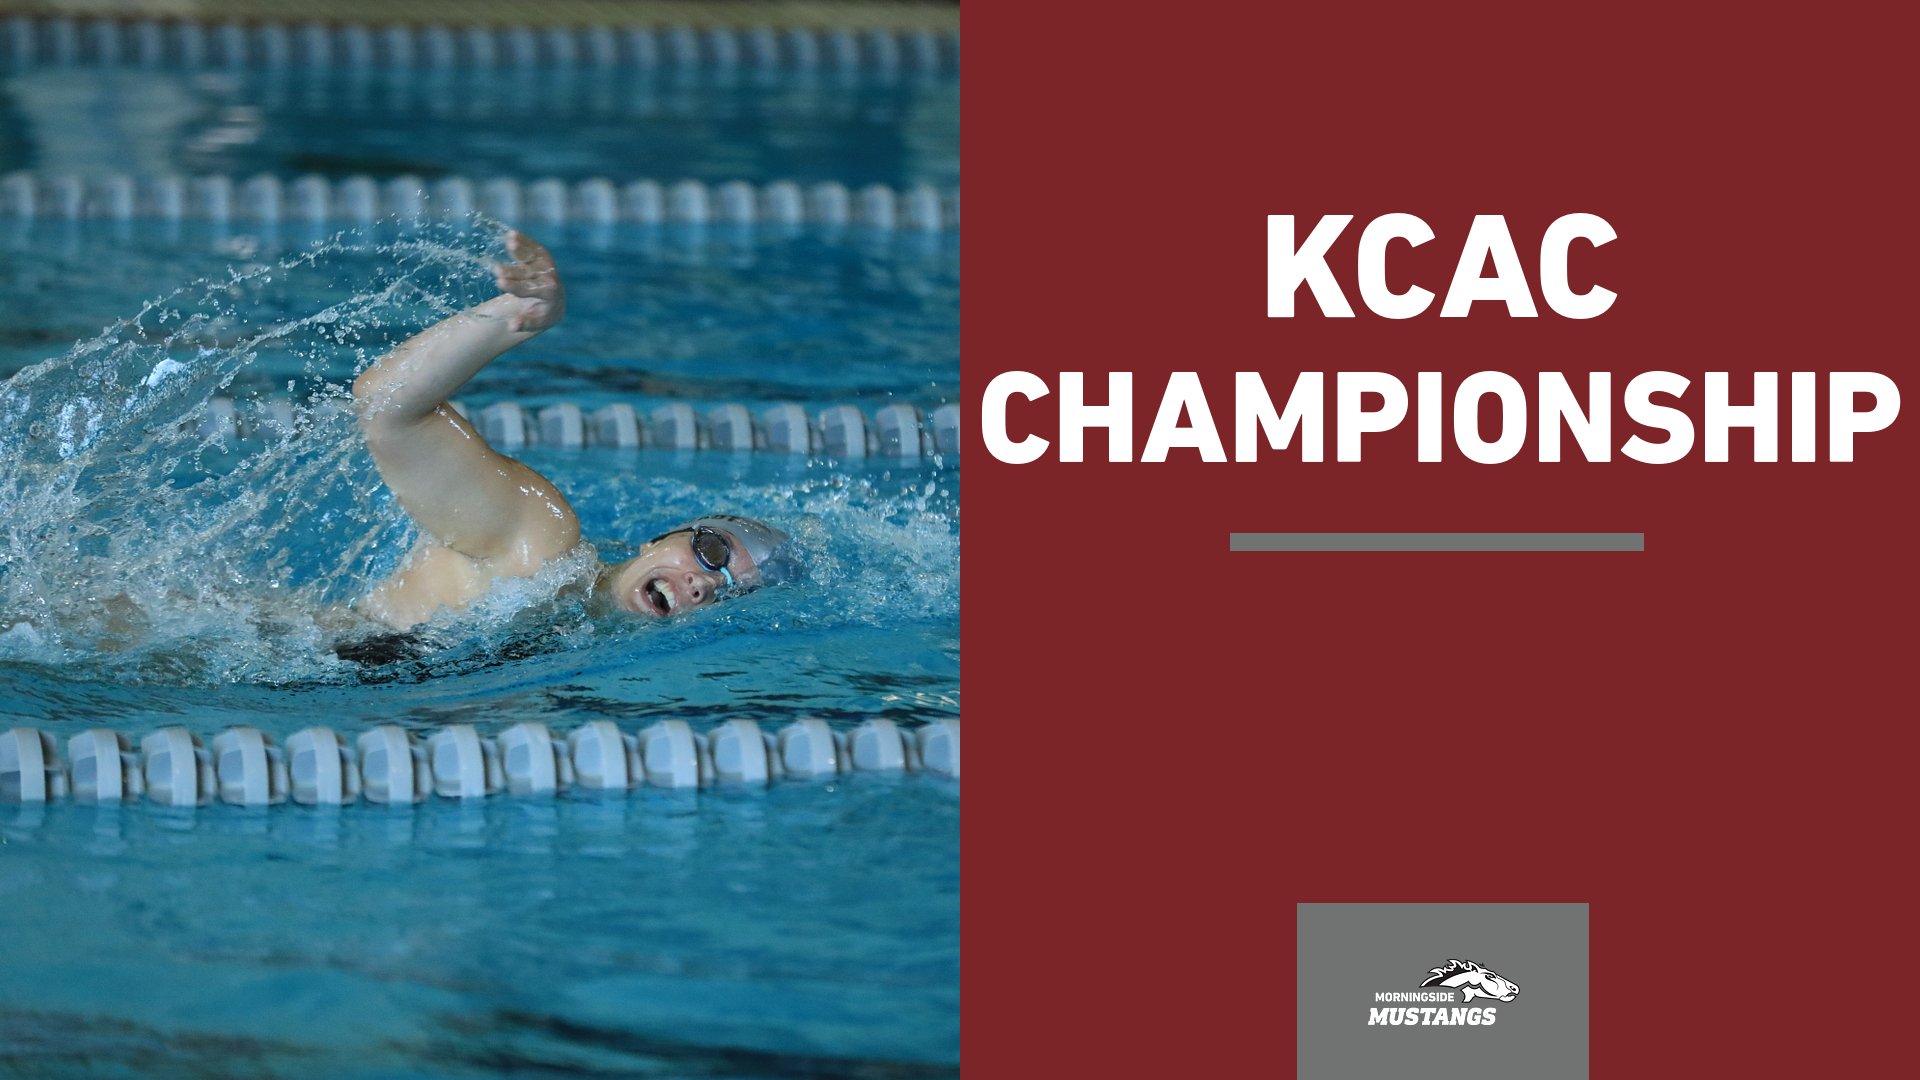 Strong core leads to success at KCAC Championships